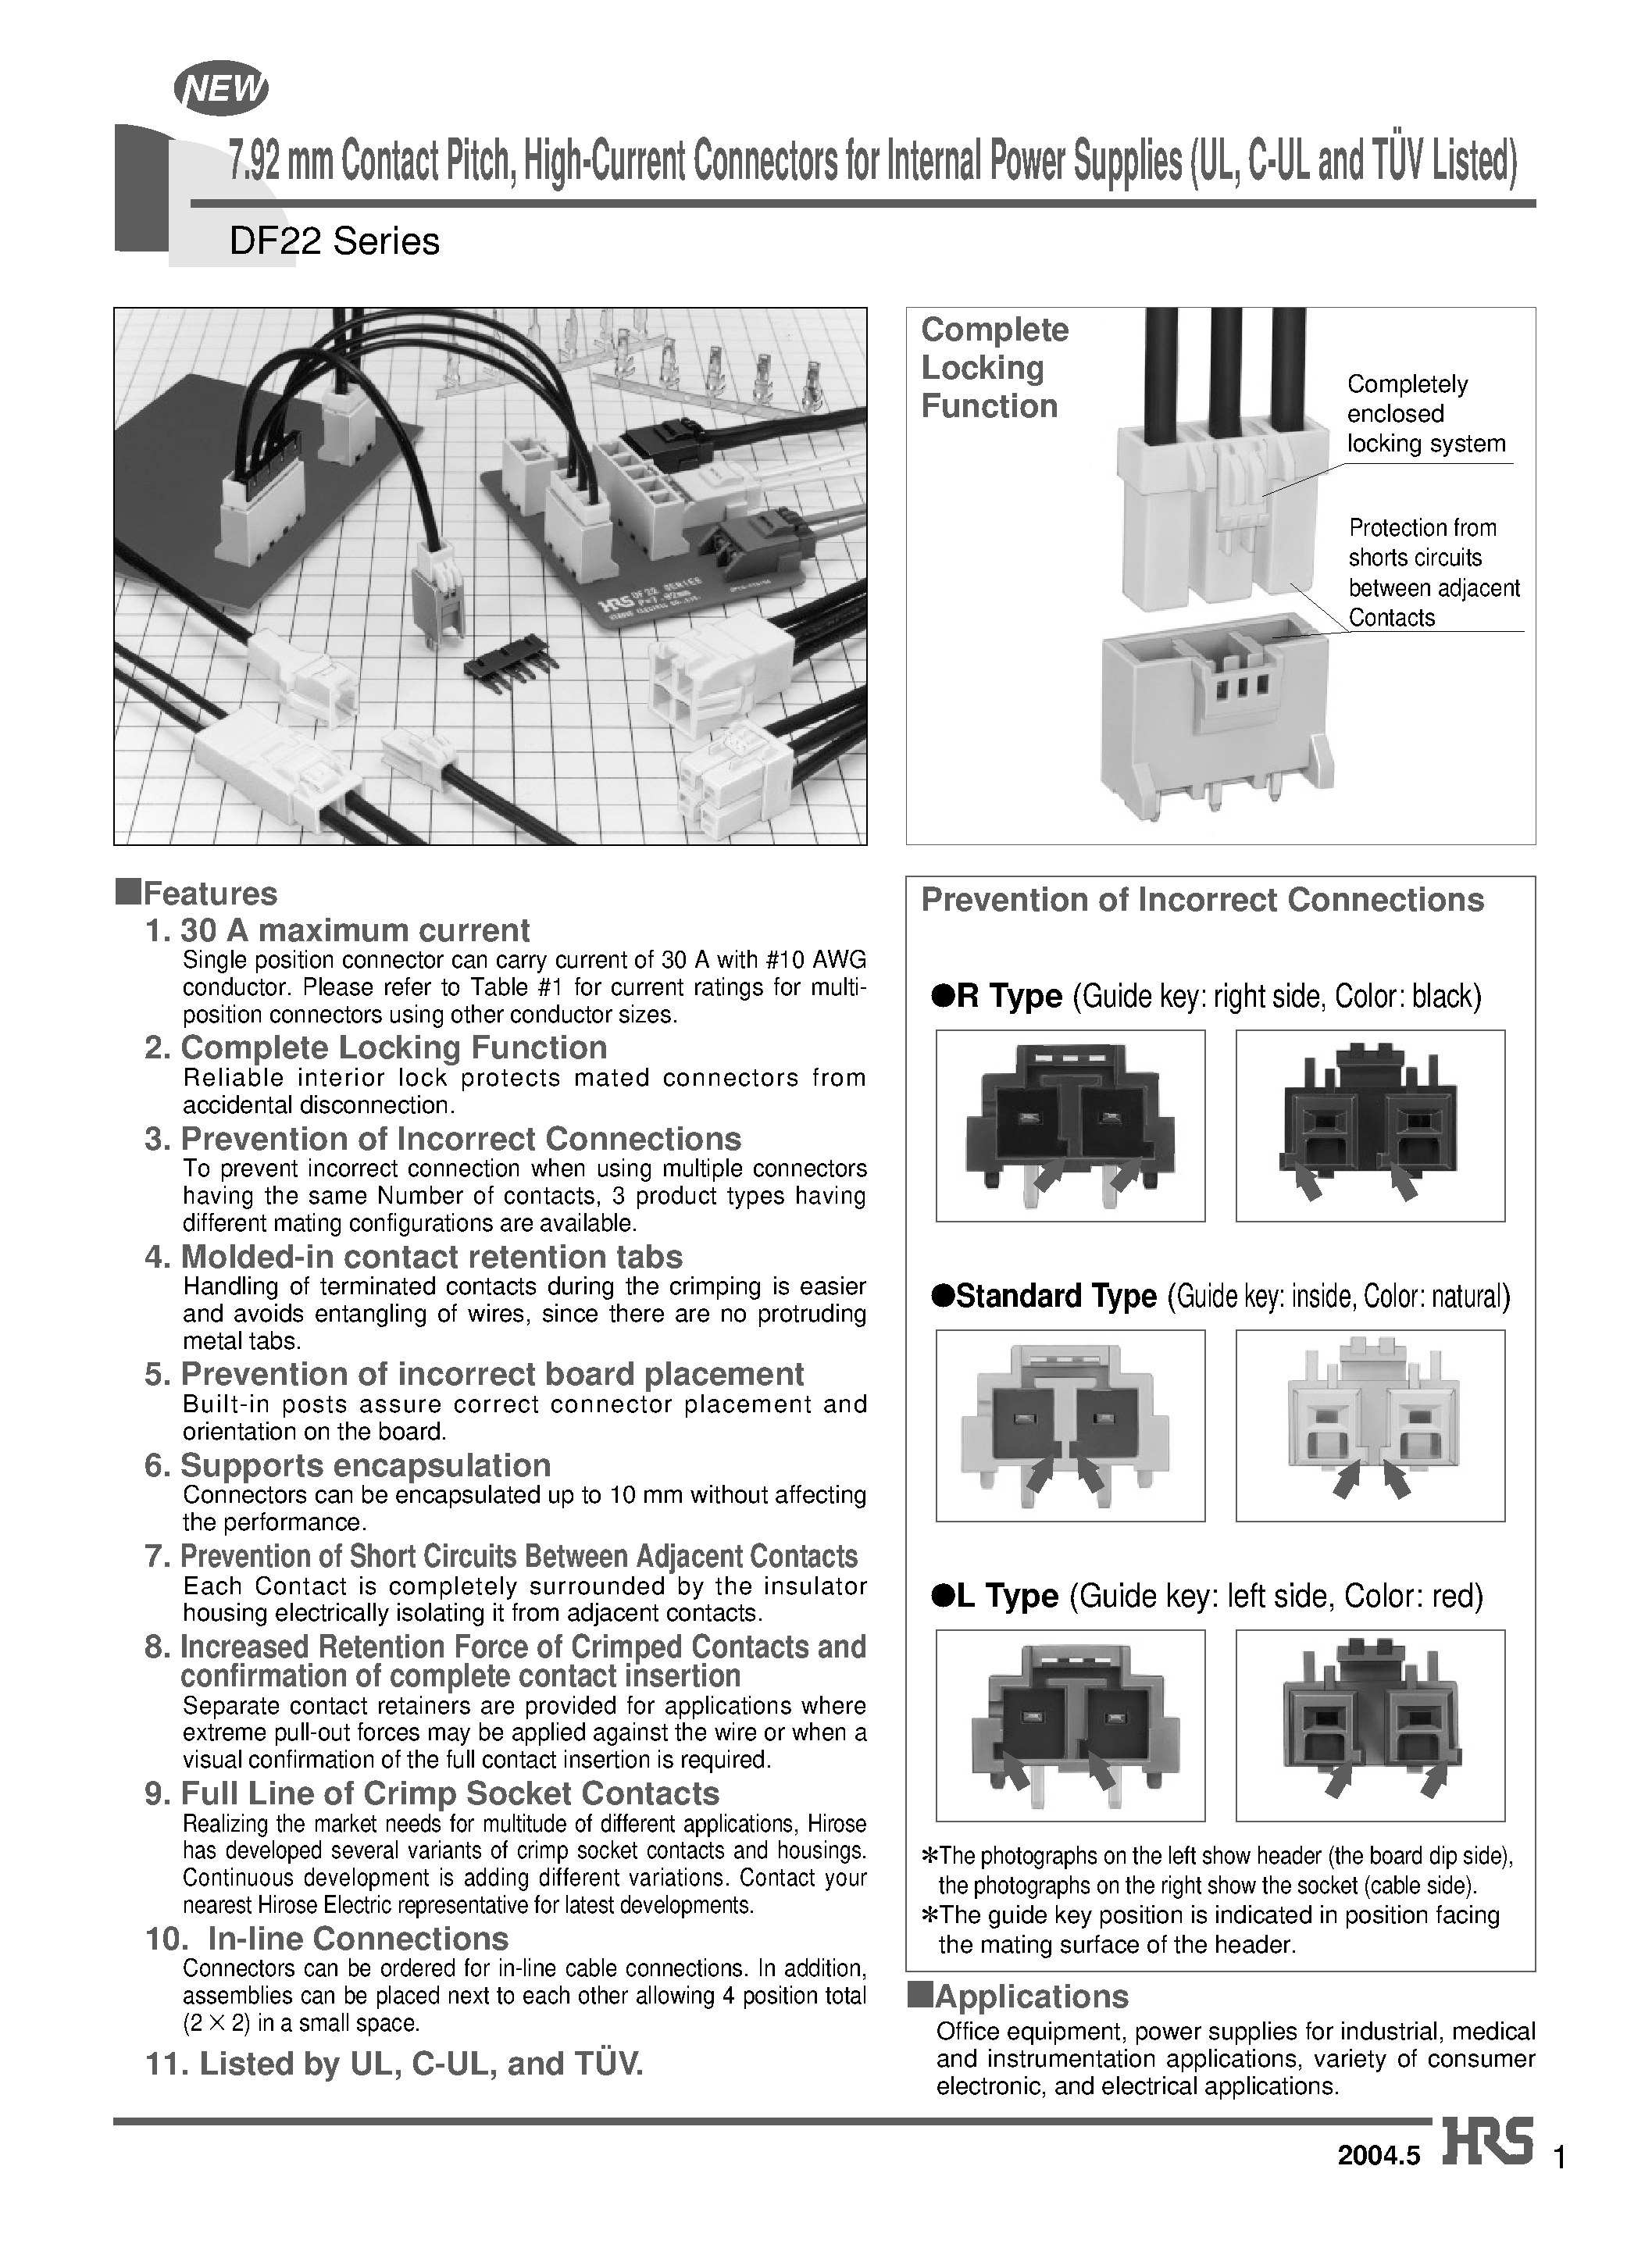 Даташит DF22AL-3S-7.92DSA - 7.92 mm Contact Pitch/ High-Current Connectors for Internal Power Supplies (UL/ C-UL and TUV Listed) страница 1